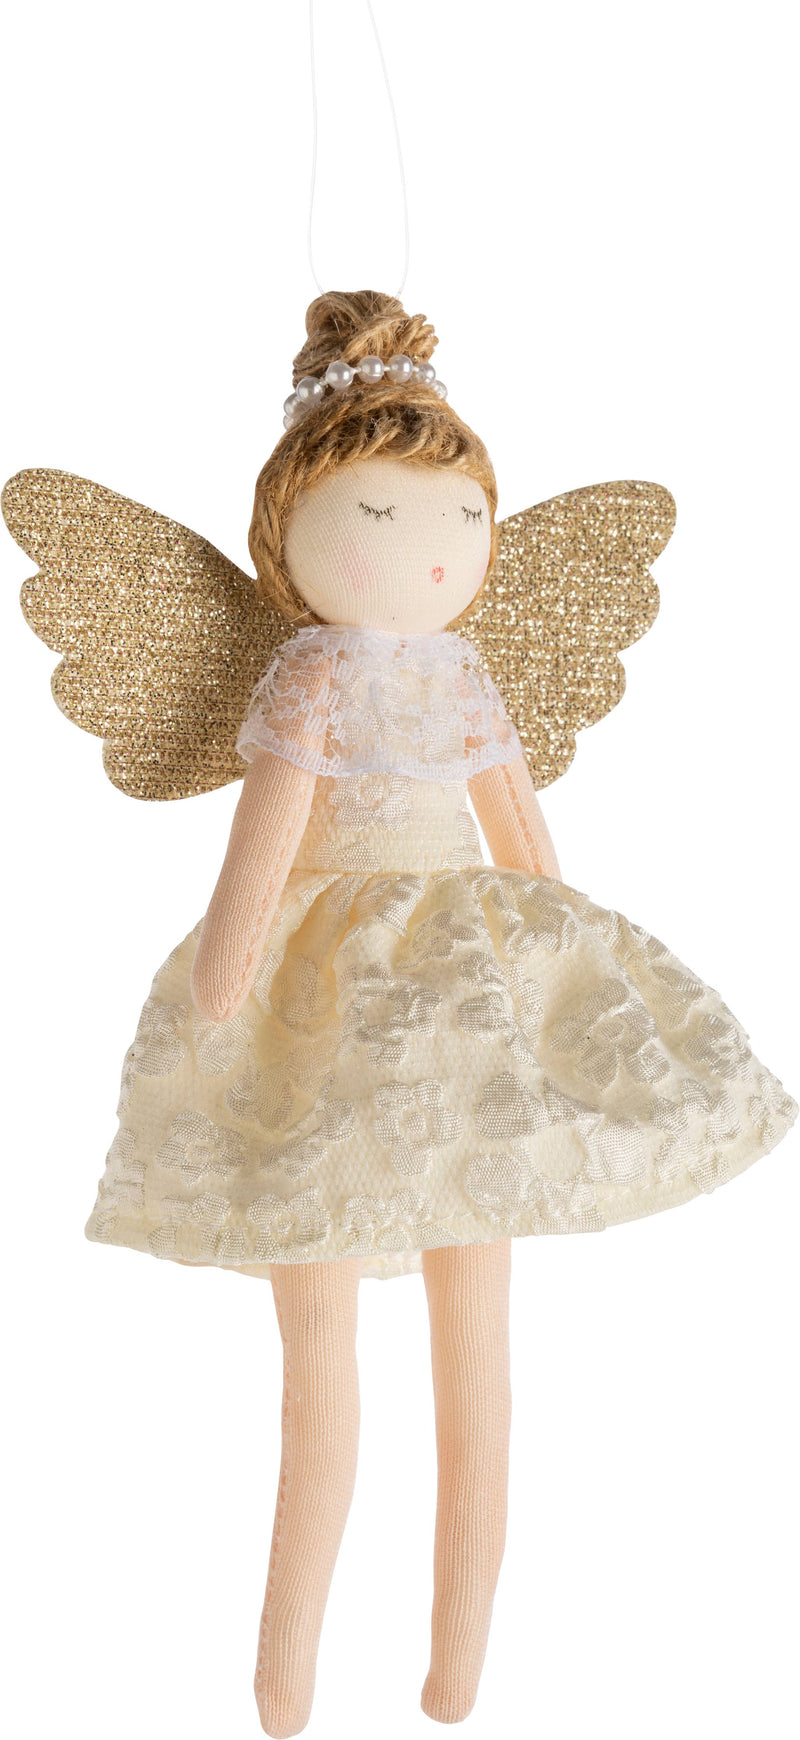 Angel with cream lace dress ornament